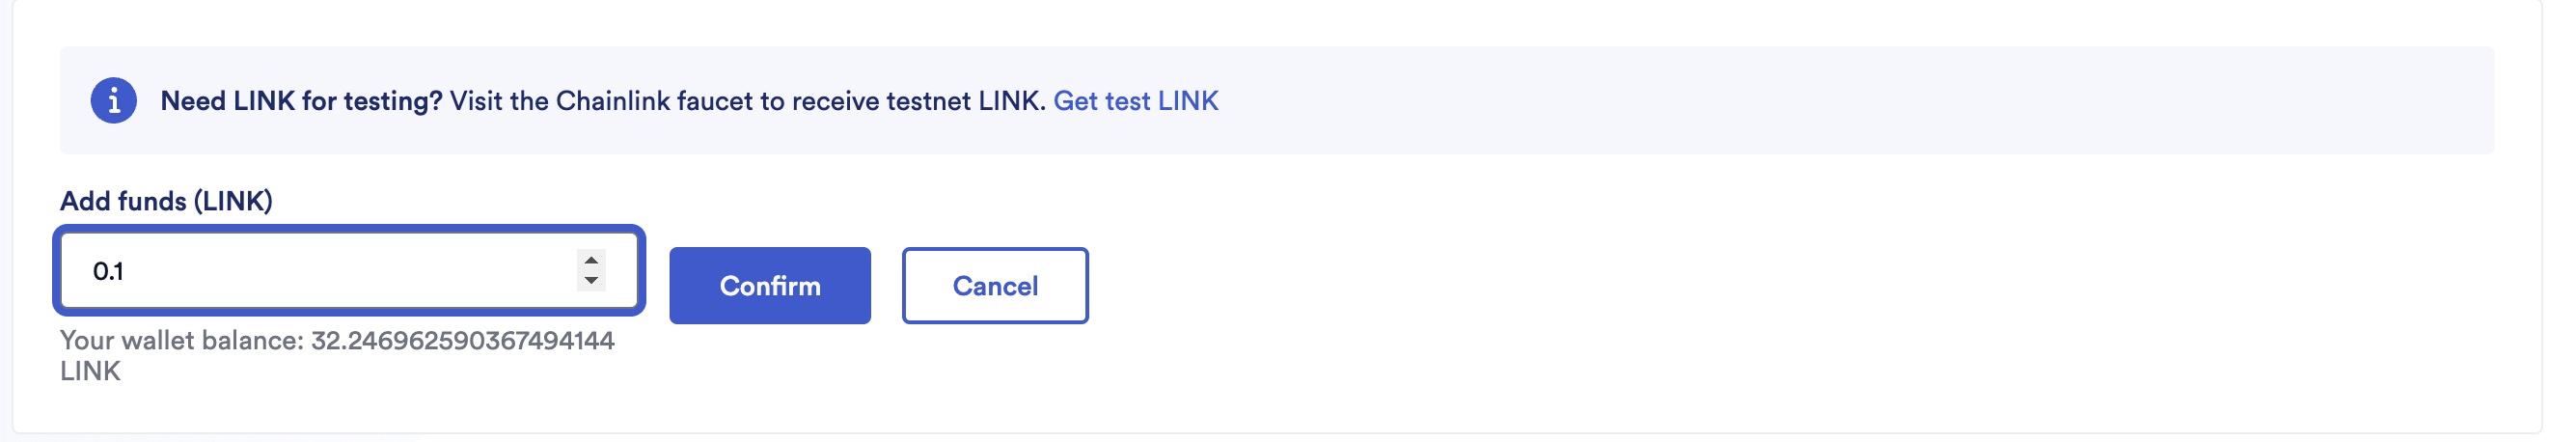 Chainlink Functions add fund to your subscription